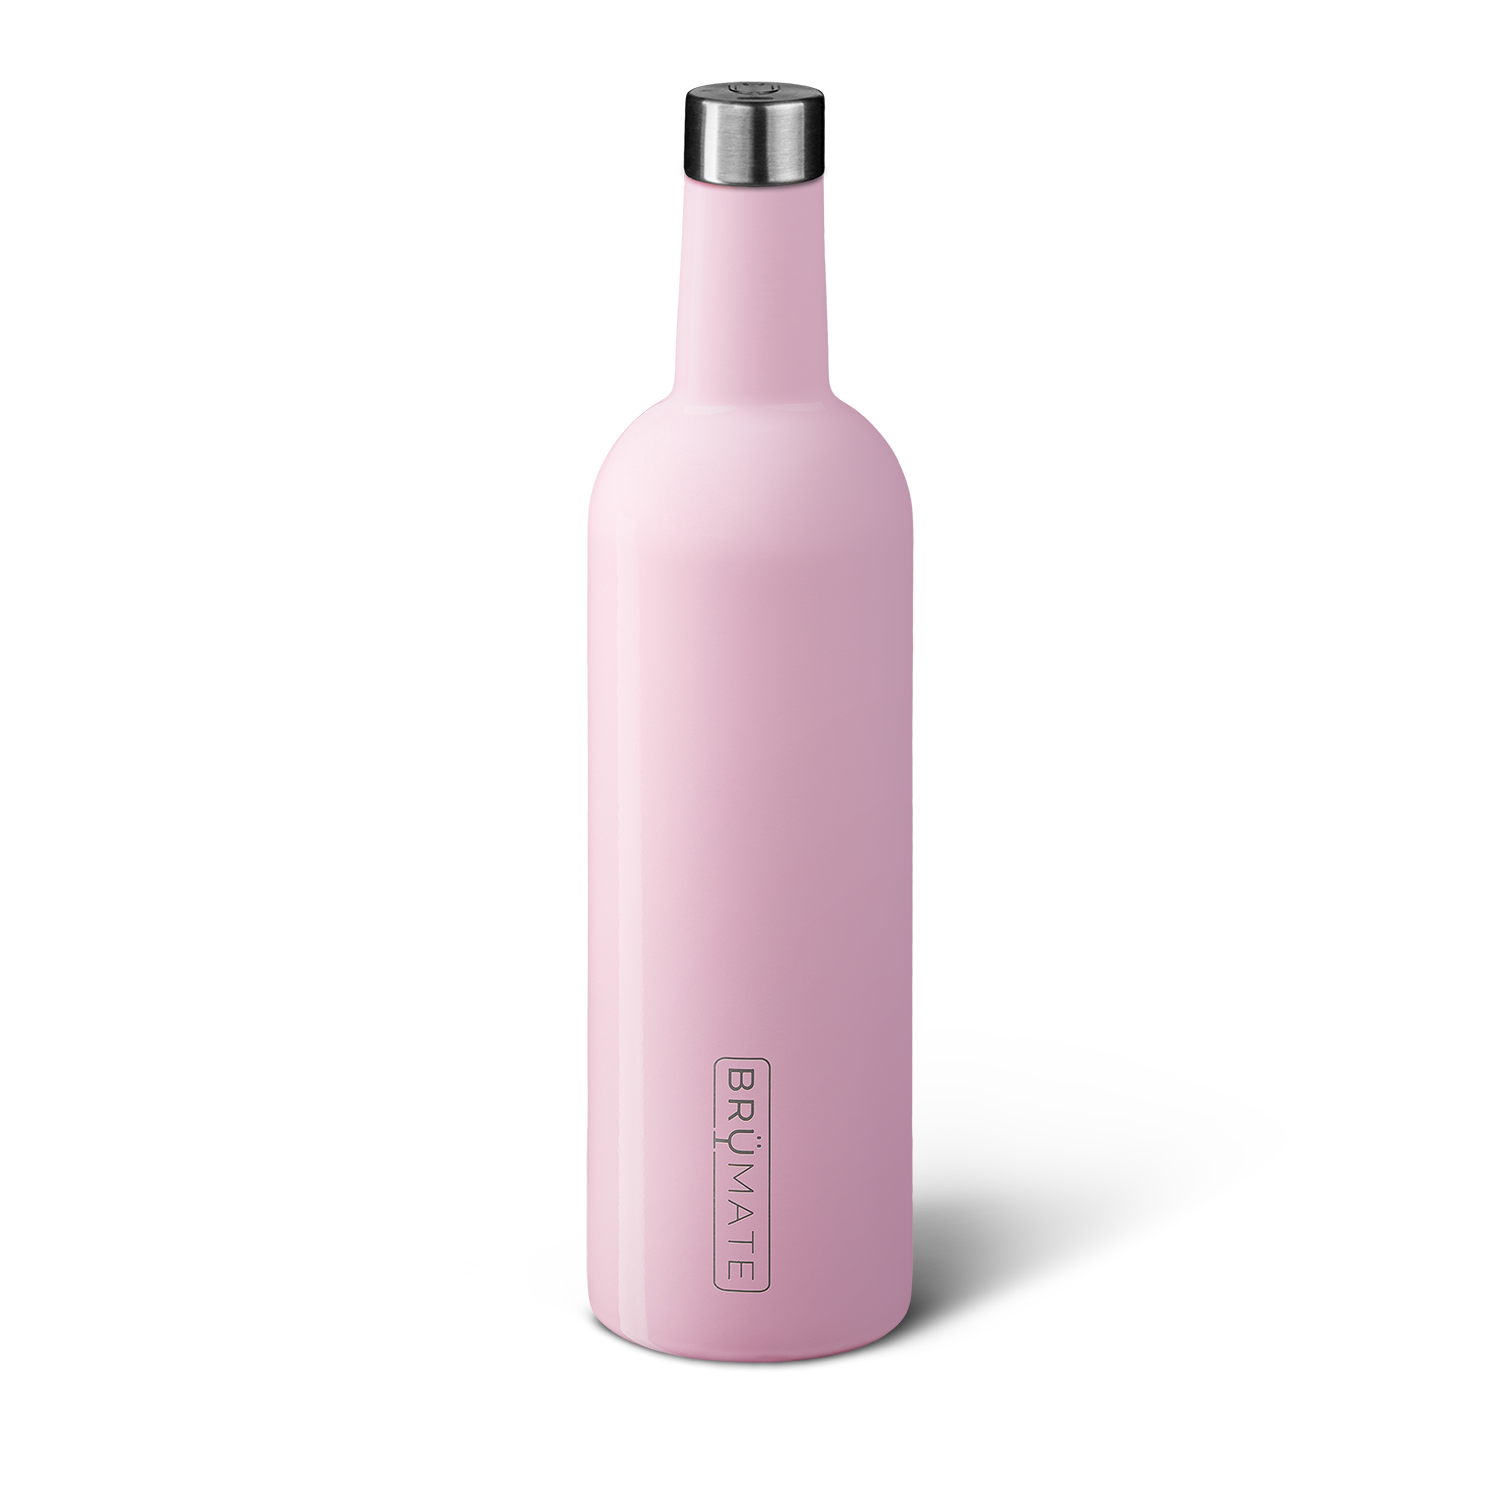 https://cdn.shopify.com/s/files/1/1114/2308/products/winesulator-blush.png?v=1660191412